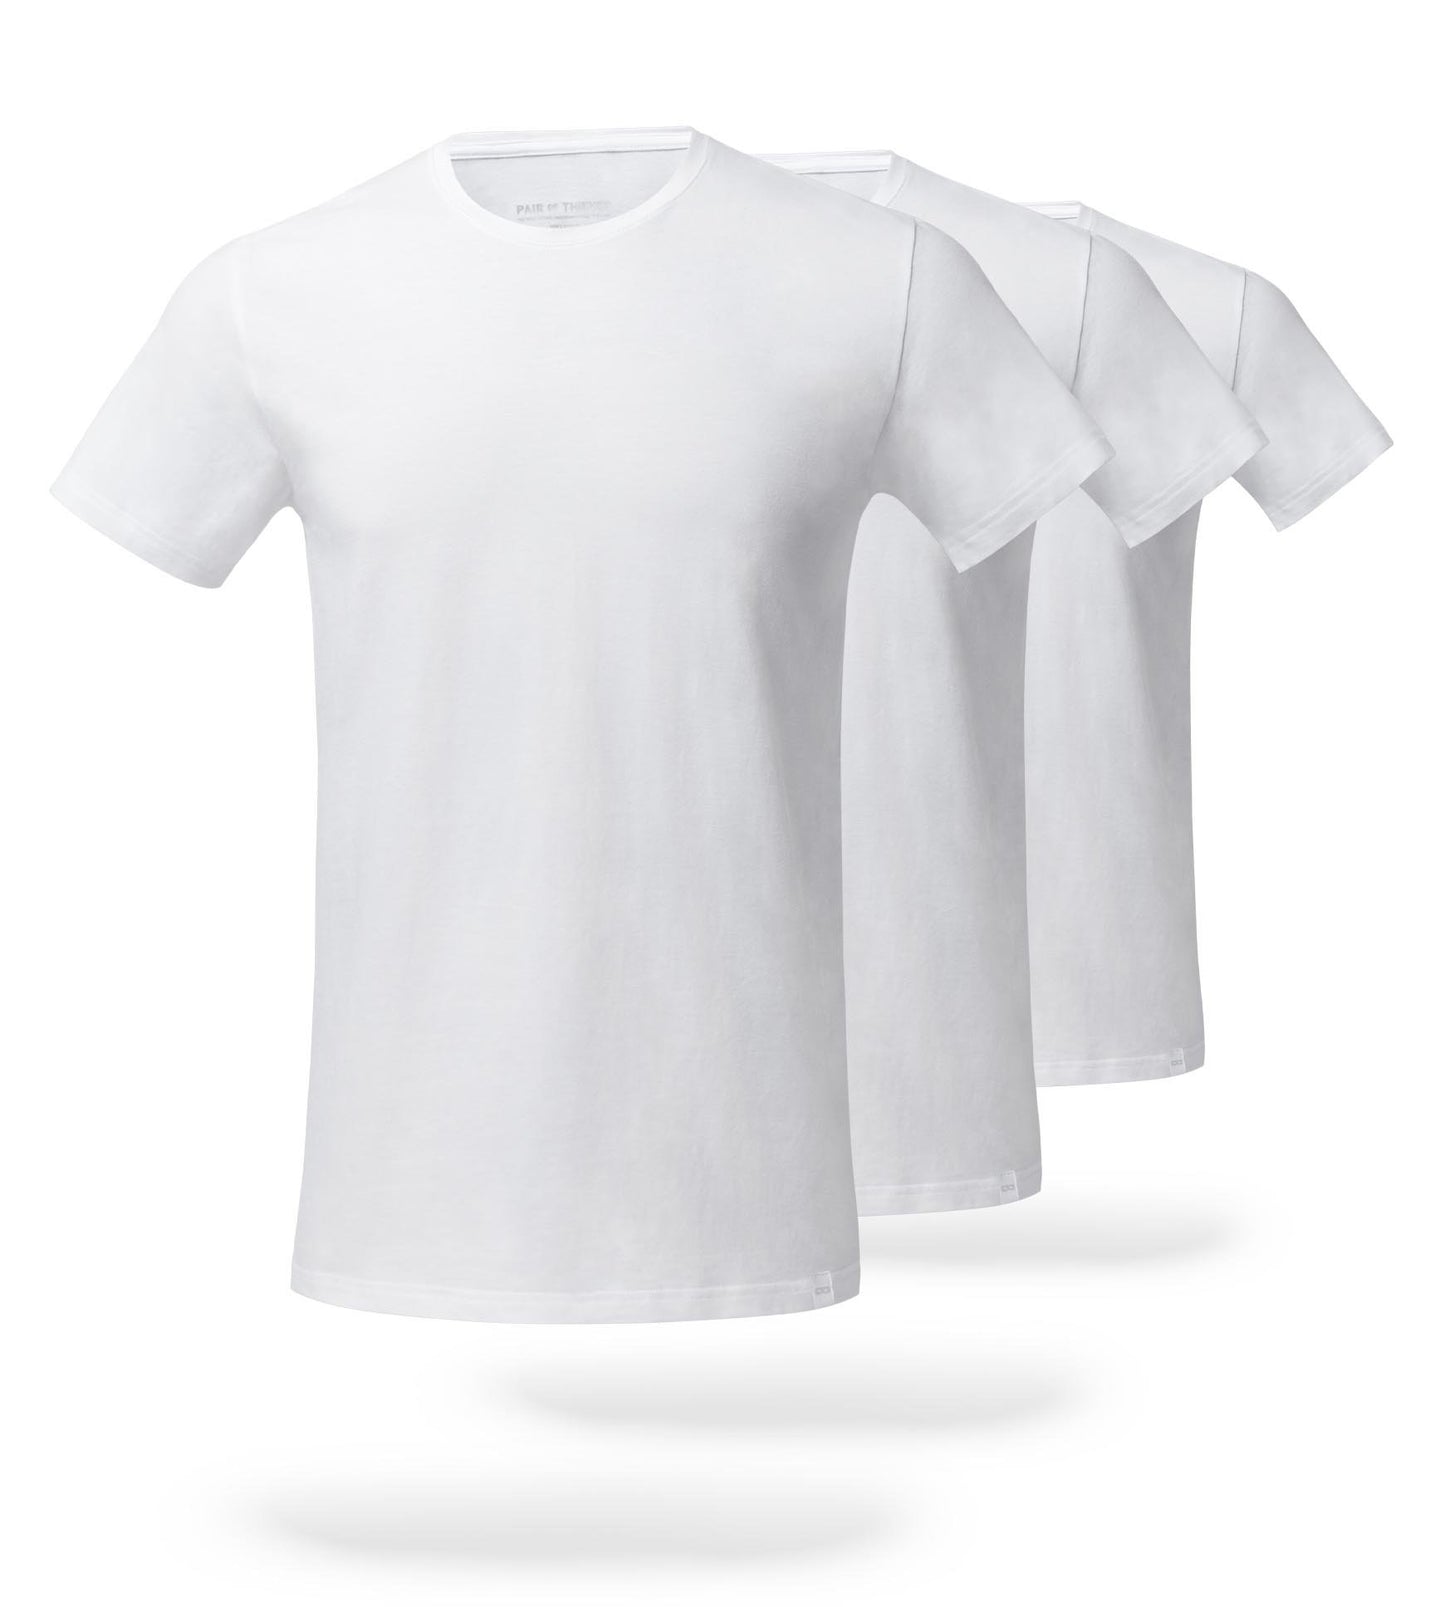 White SuperSoft Crew Neck Undershirt 3 Pack contains colors Whitesmoke, Silver, Gains boro, Gains boro, Light Gray, Dark Gray, Whitesmoke, Gains boro, Silver